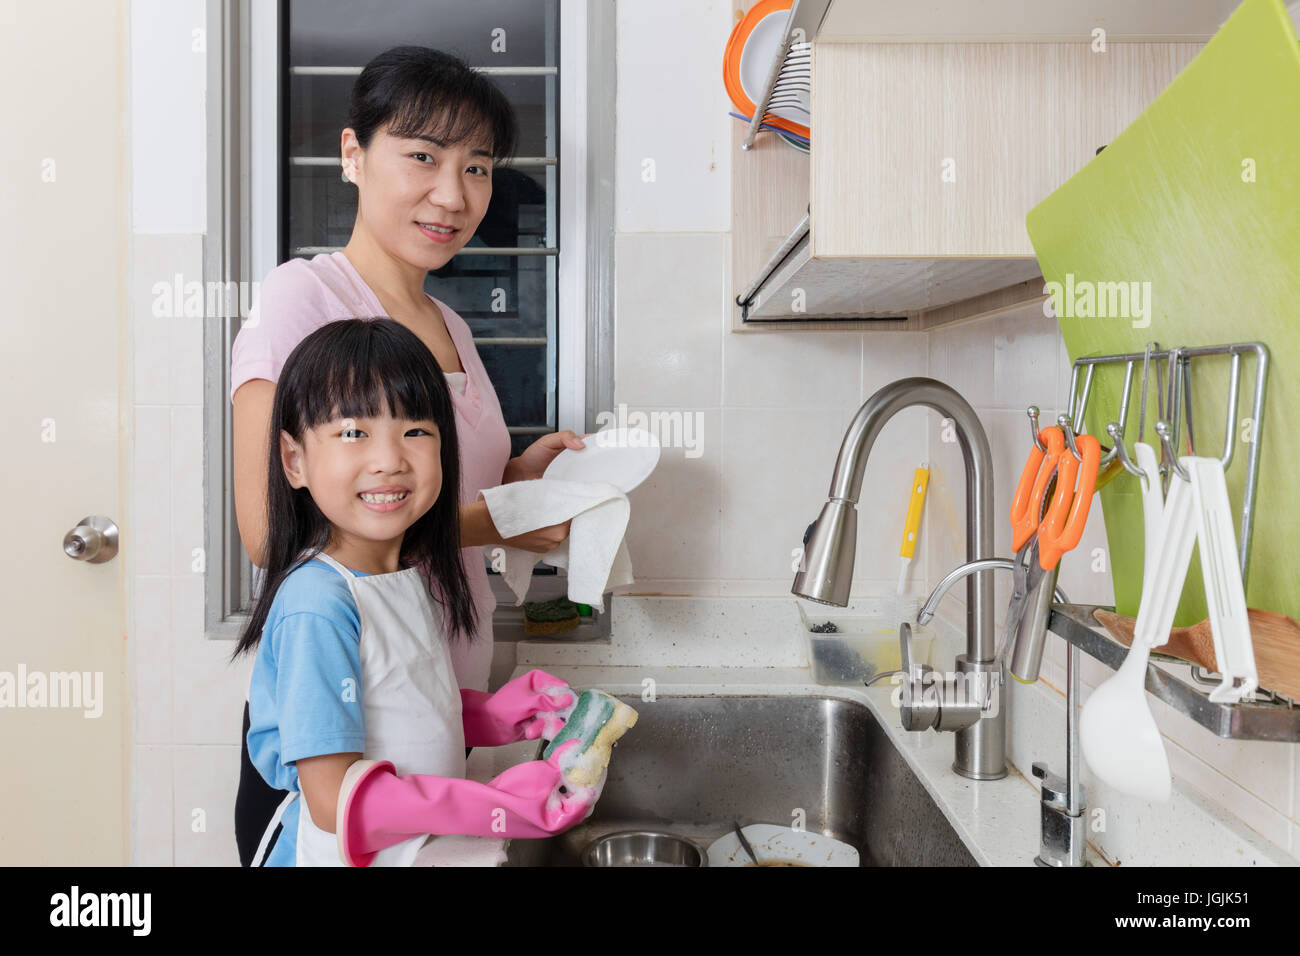 https://c8.alamy.com/comp/JGJK51/asian-chinese-little-girl-helping-mother-washing-dishes-in-the-kitchen-JGJK51.jpg